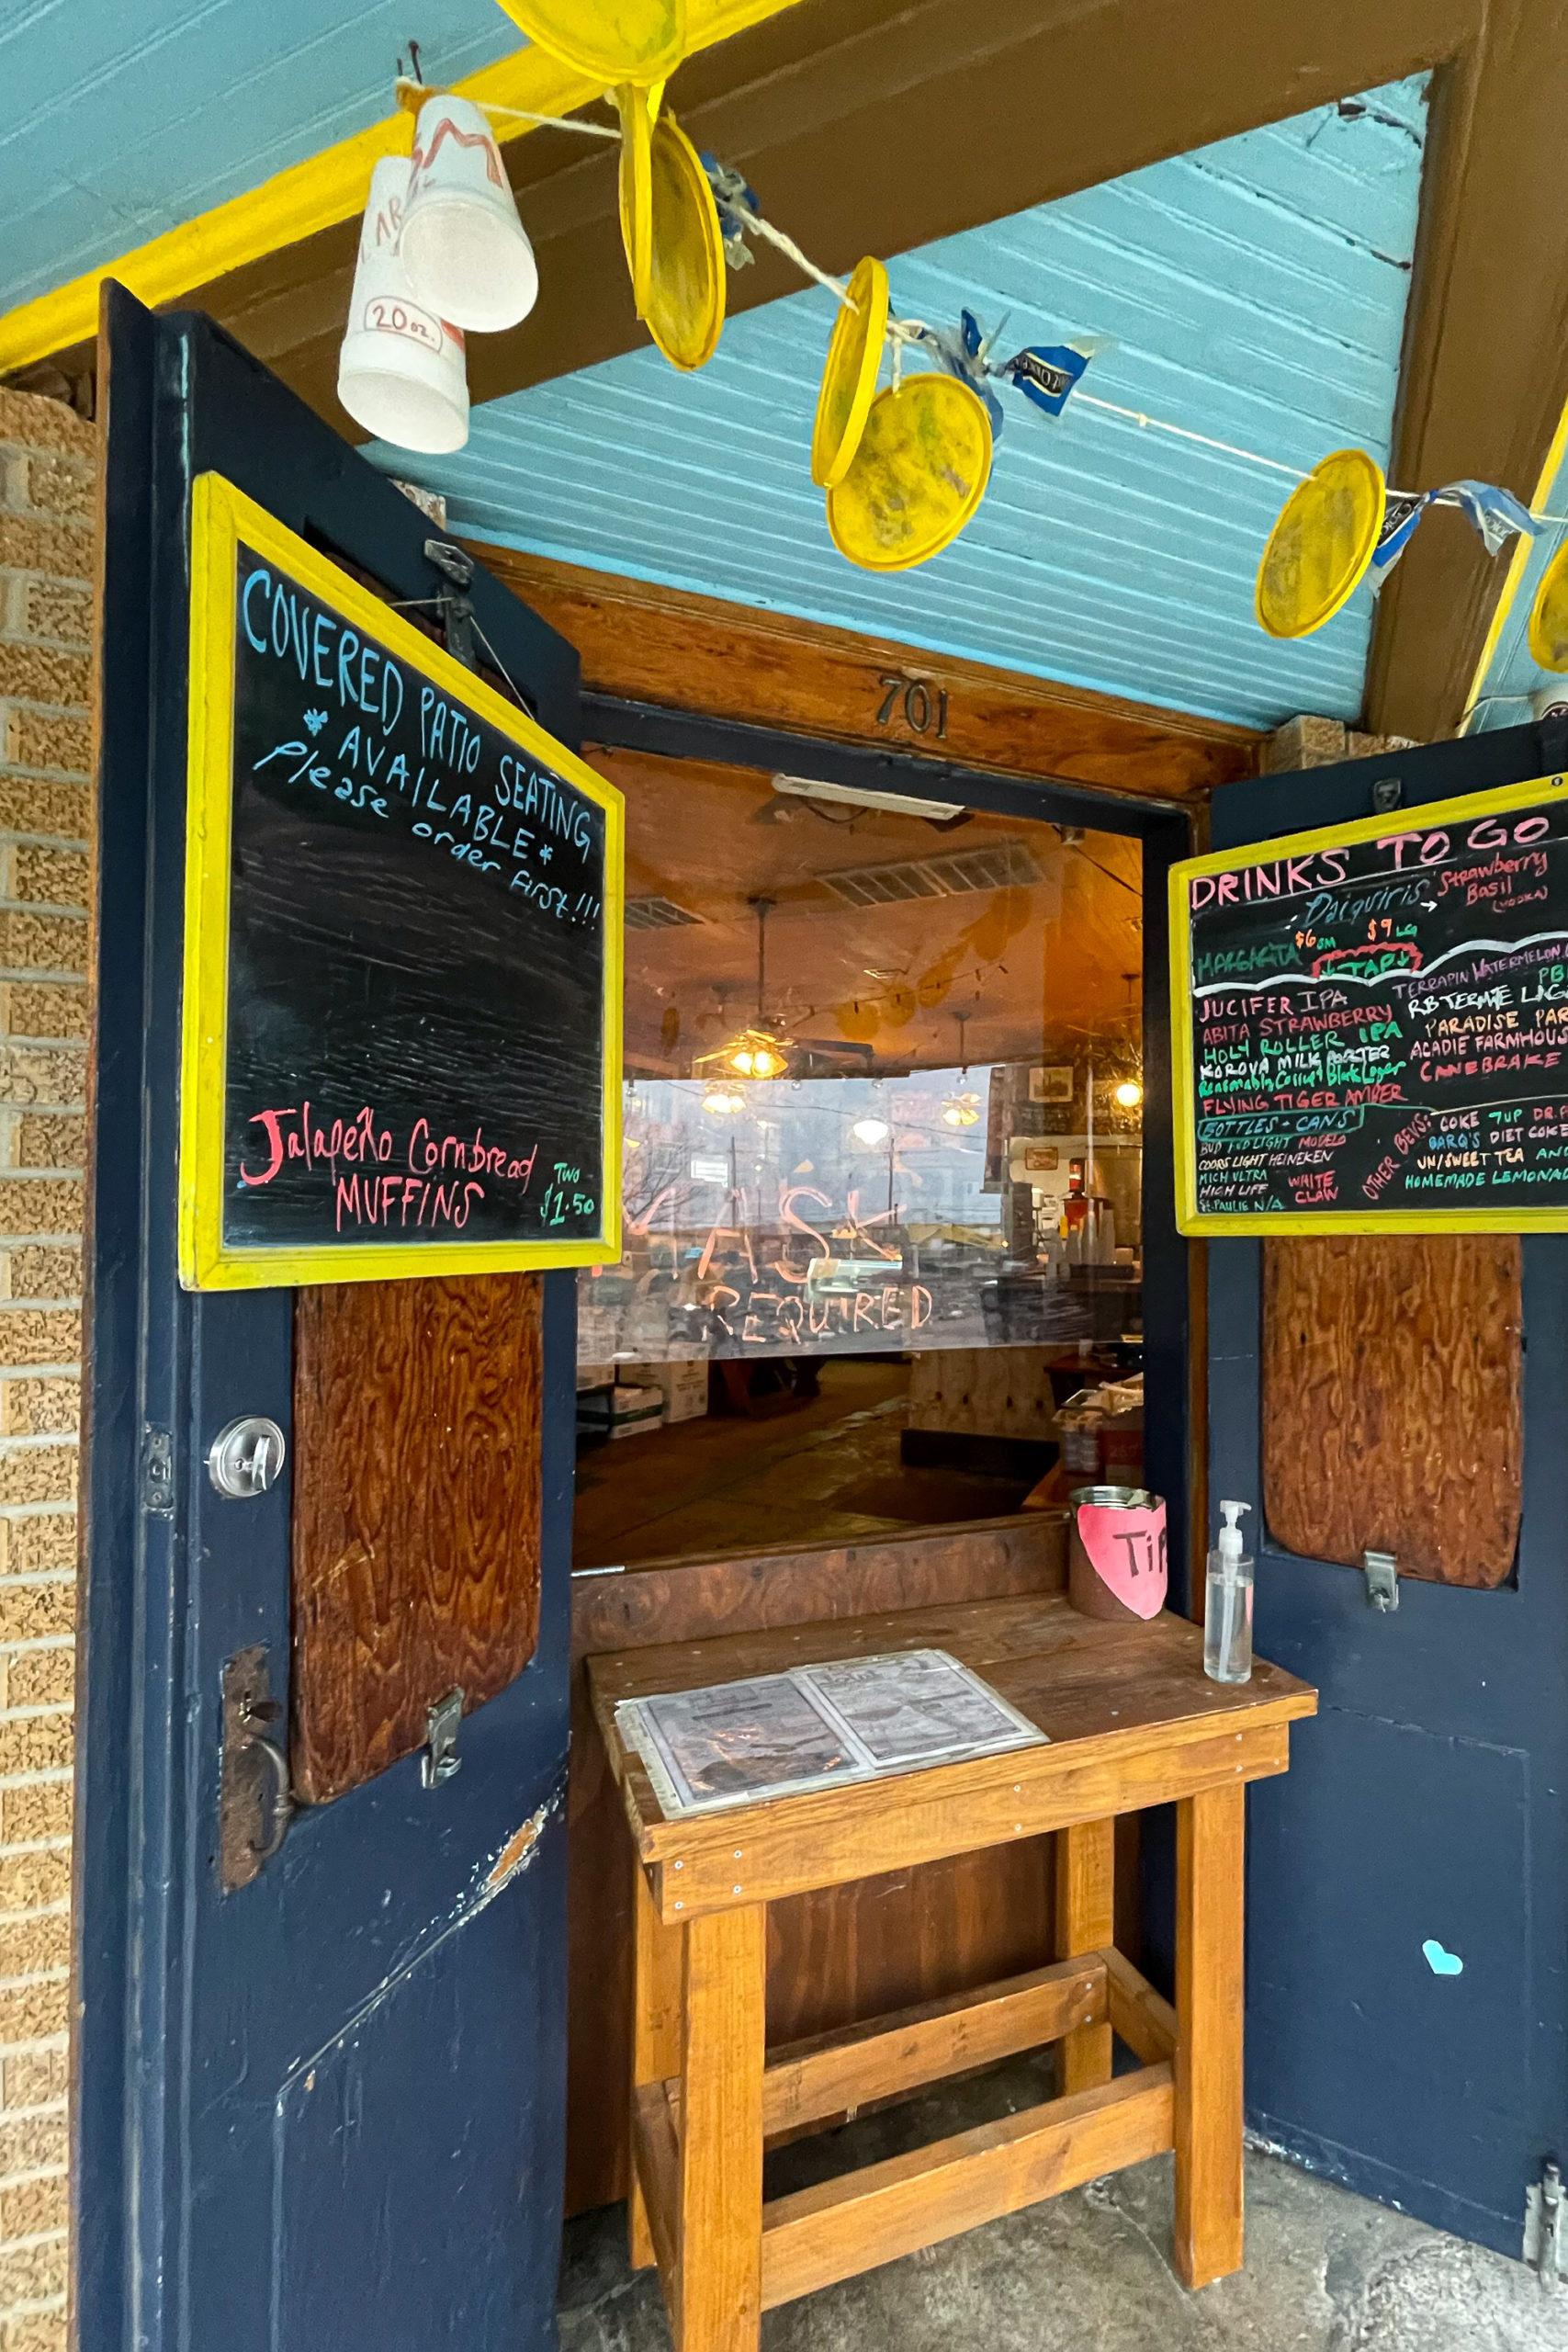 The Joint in New Orleans | Nola Food via Finding Beautiful Truth